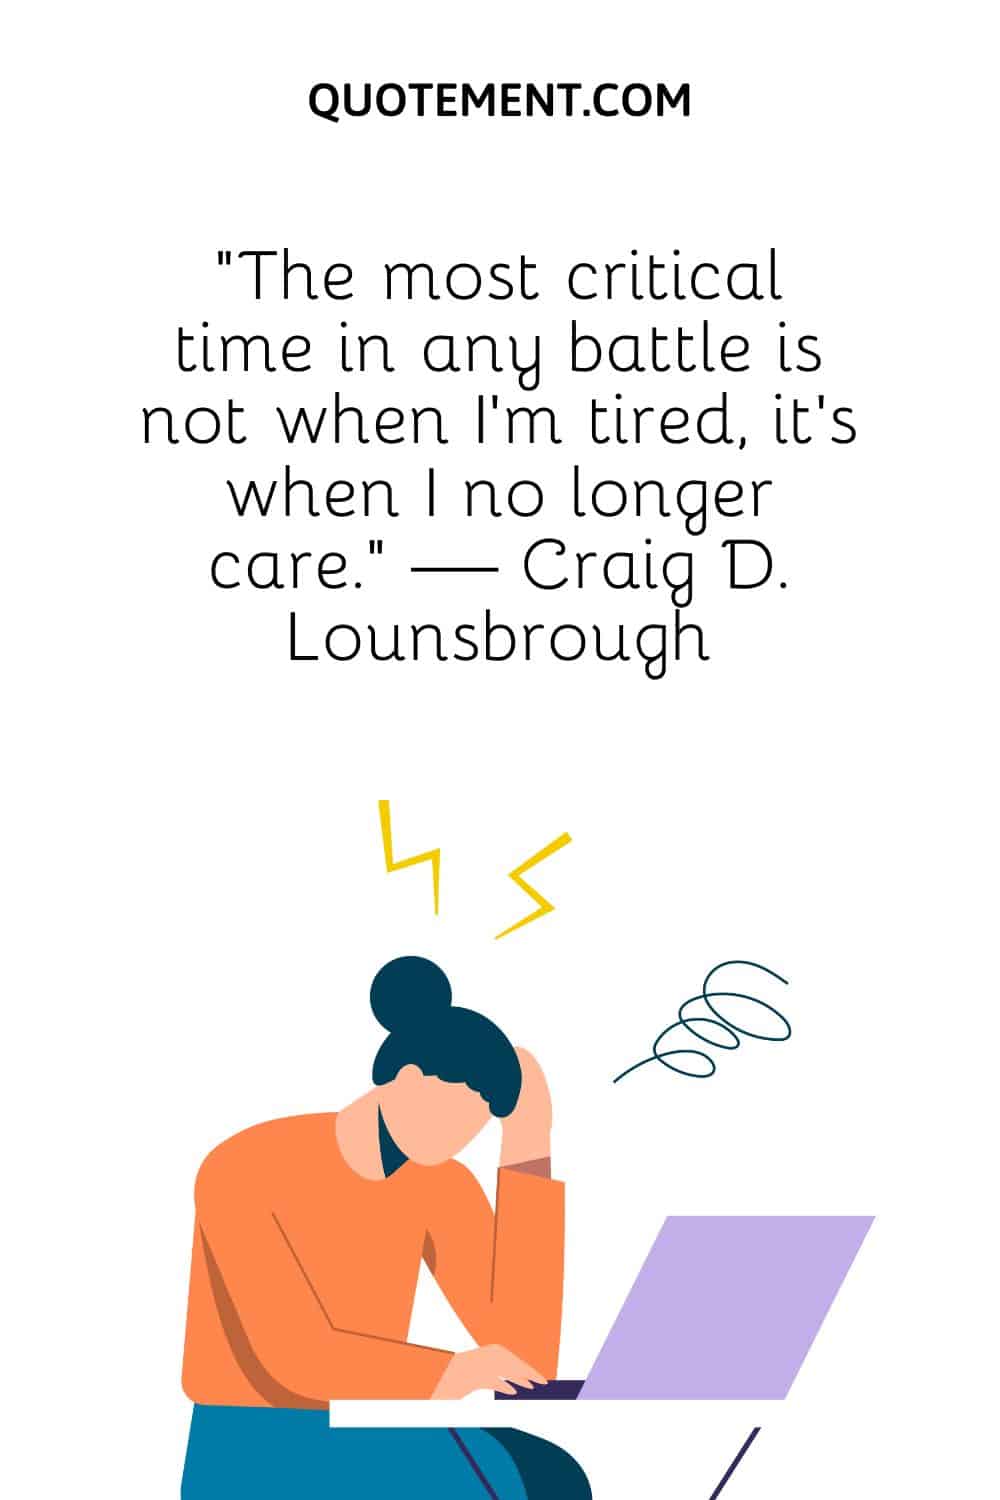 The most critical time in any battle is not when I'm tired, it's when I no longer care